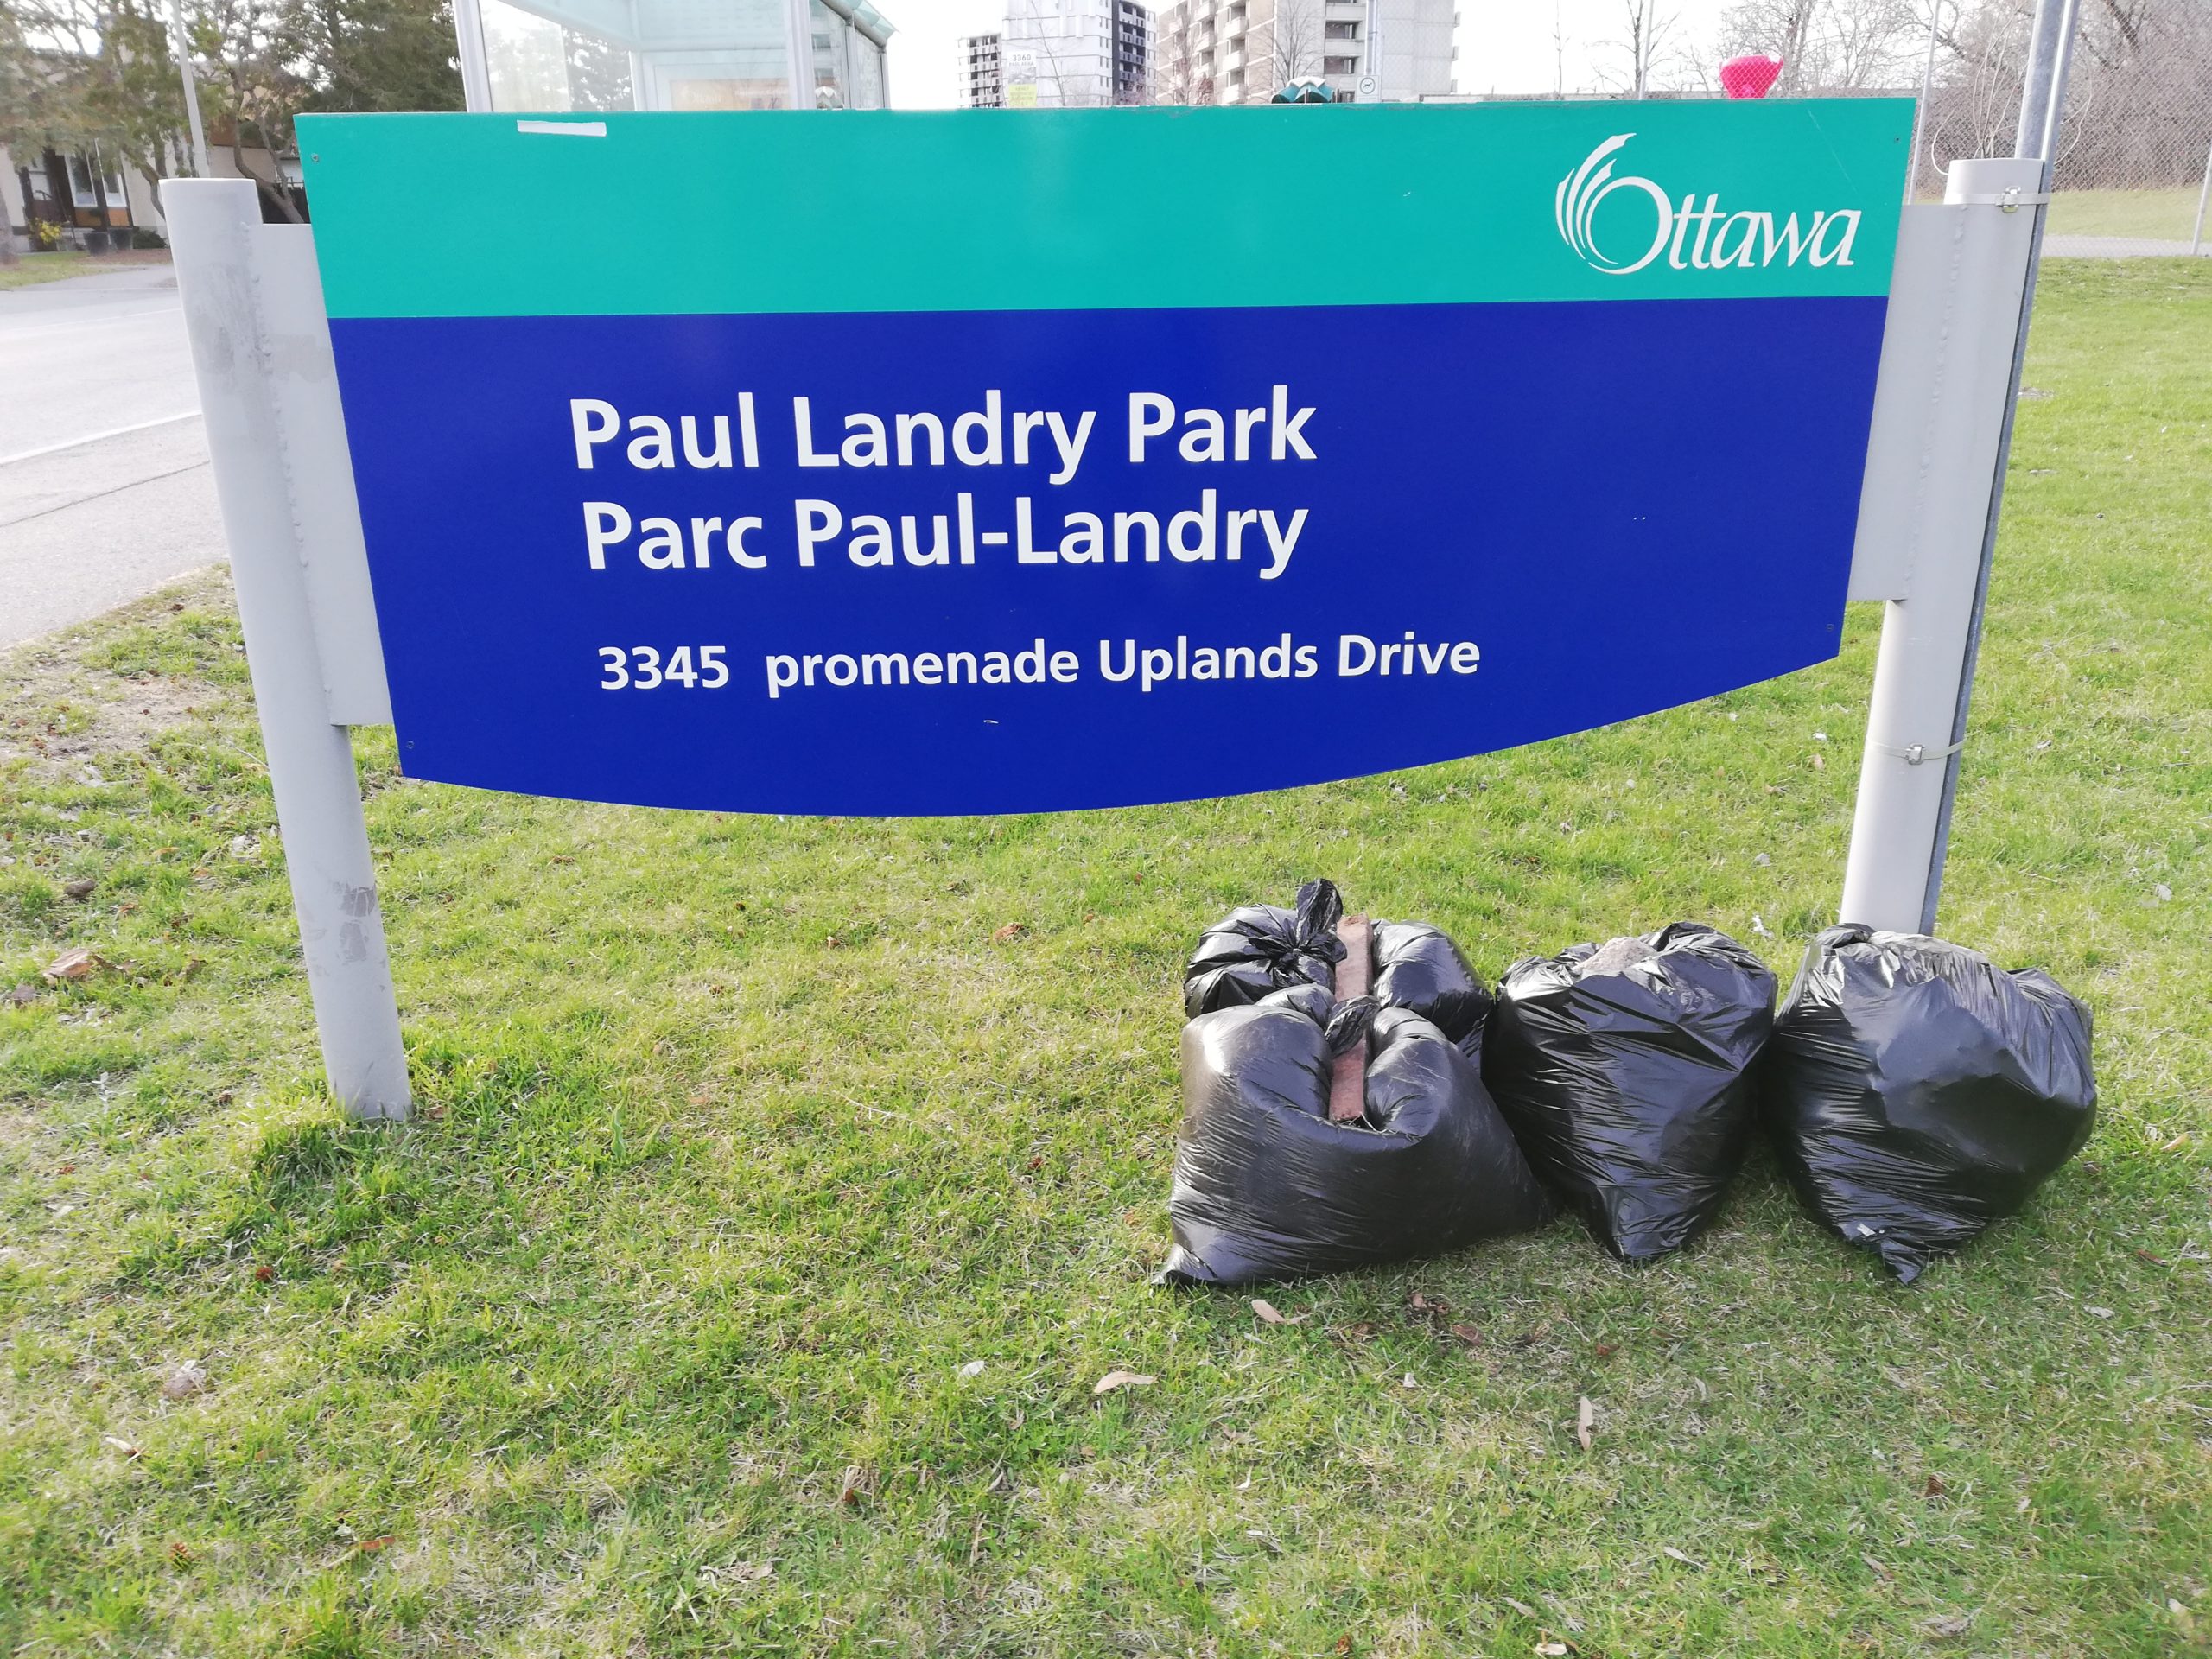 Paul Landry Park Spring Cleaning:  Saturday, April 29th, 2 pm